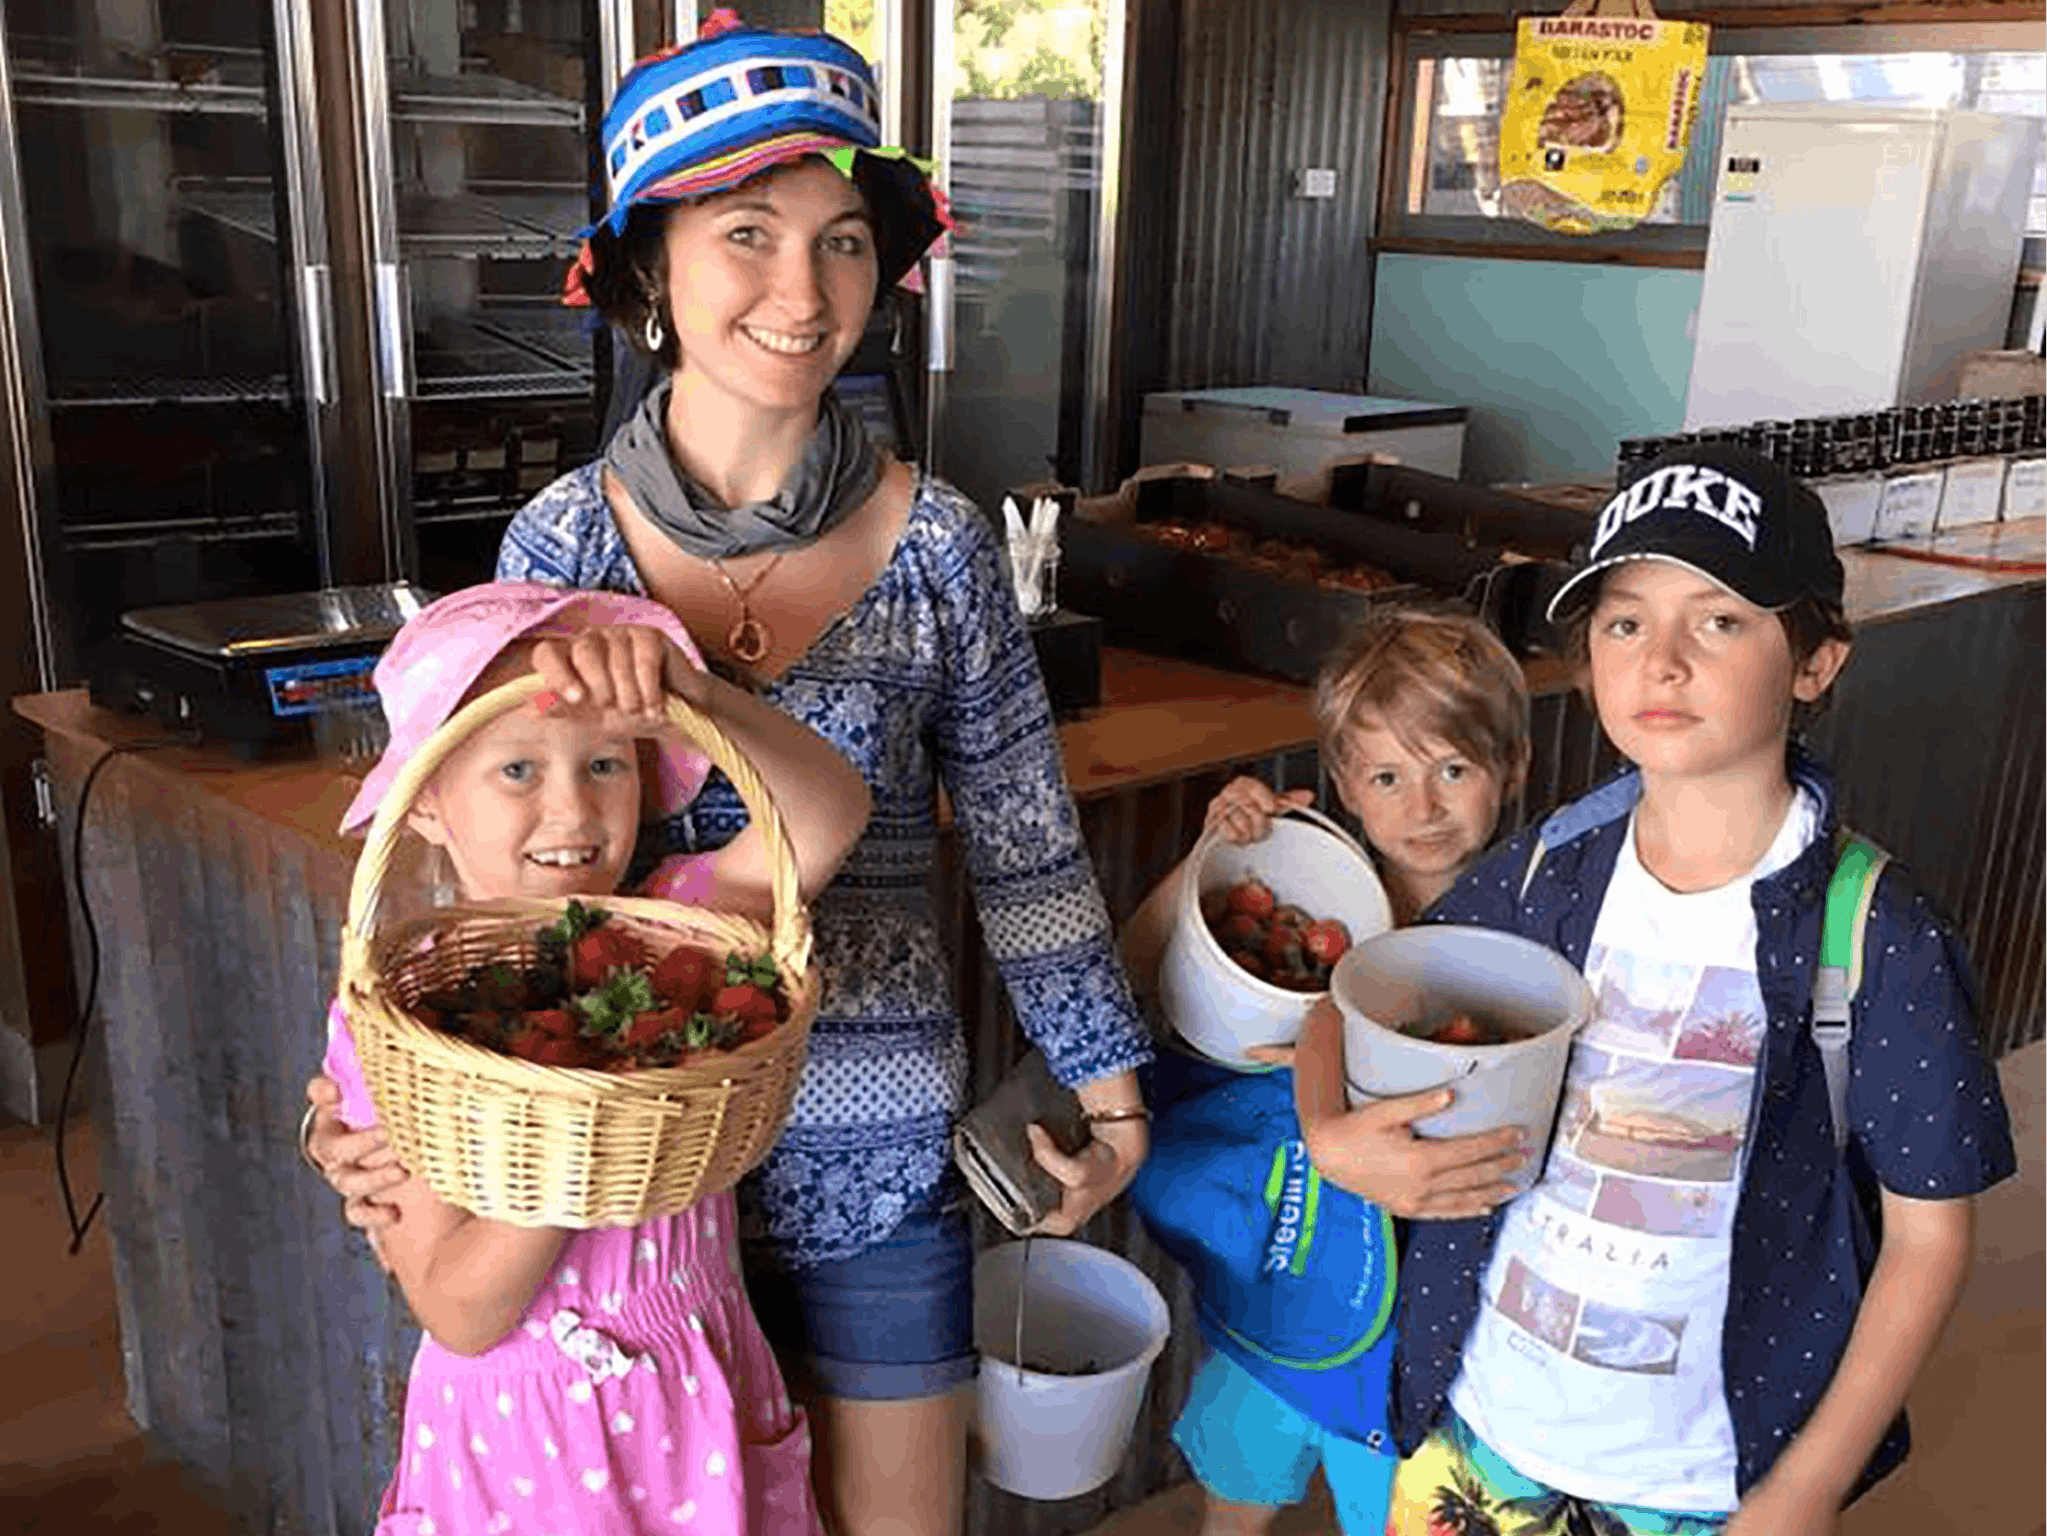 A family of U-pickers holding buckets full of strawberries